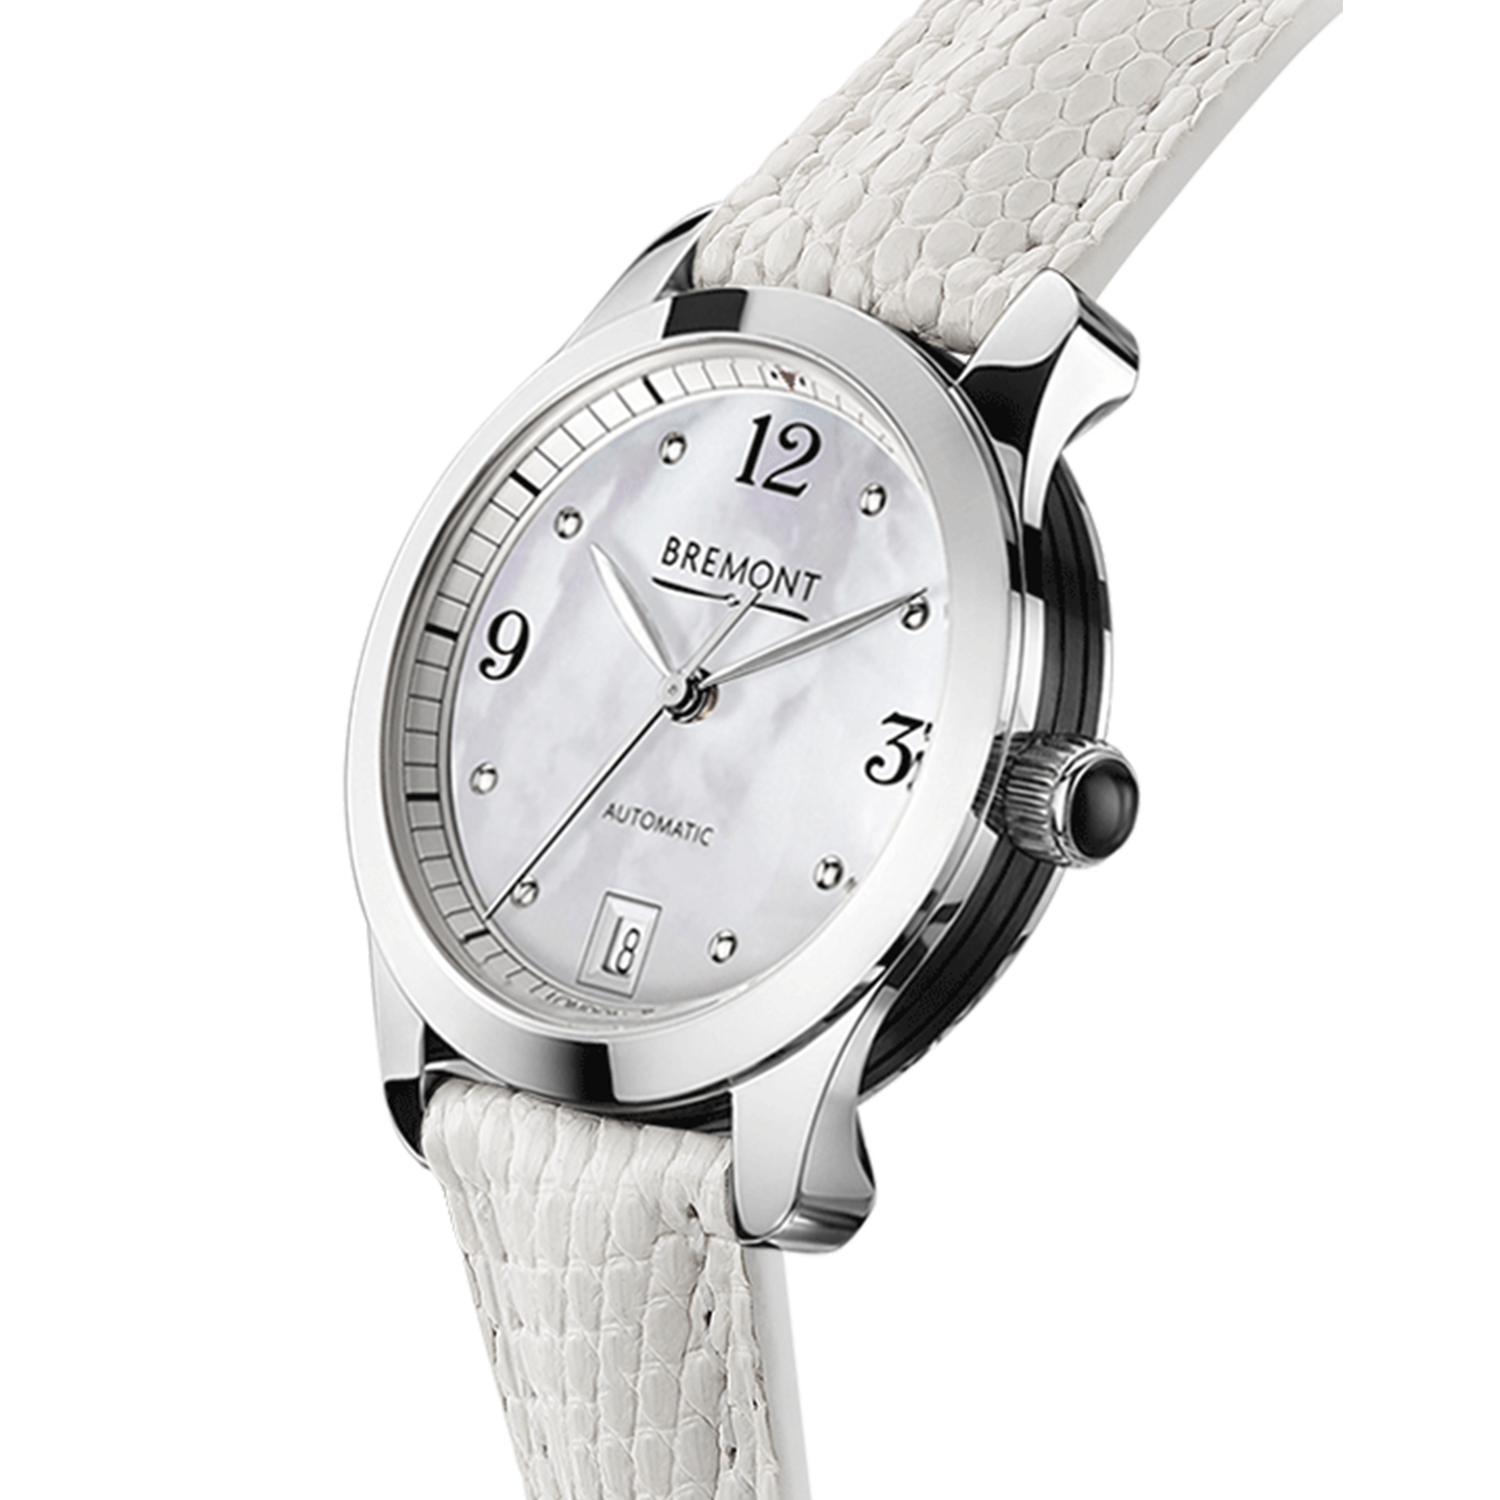 Solo 34 Ladies Mother of Pearl White Watch